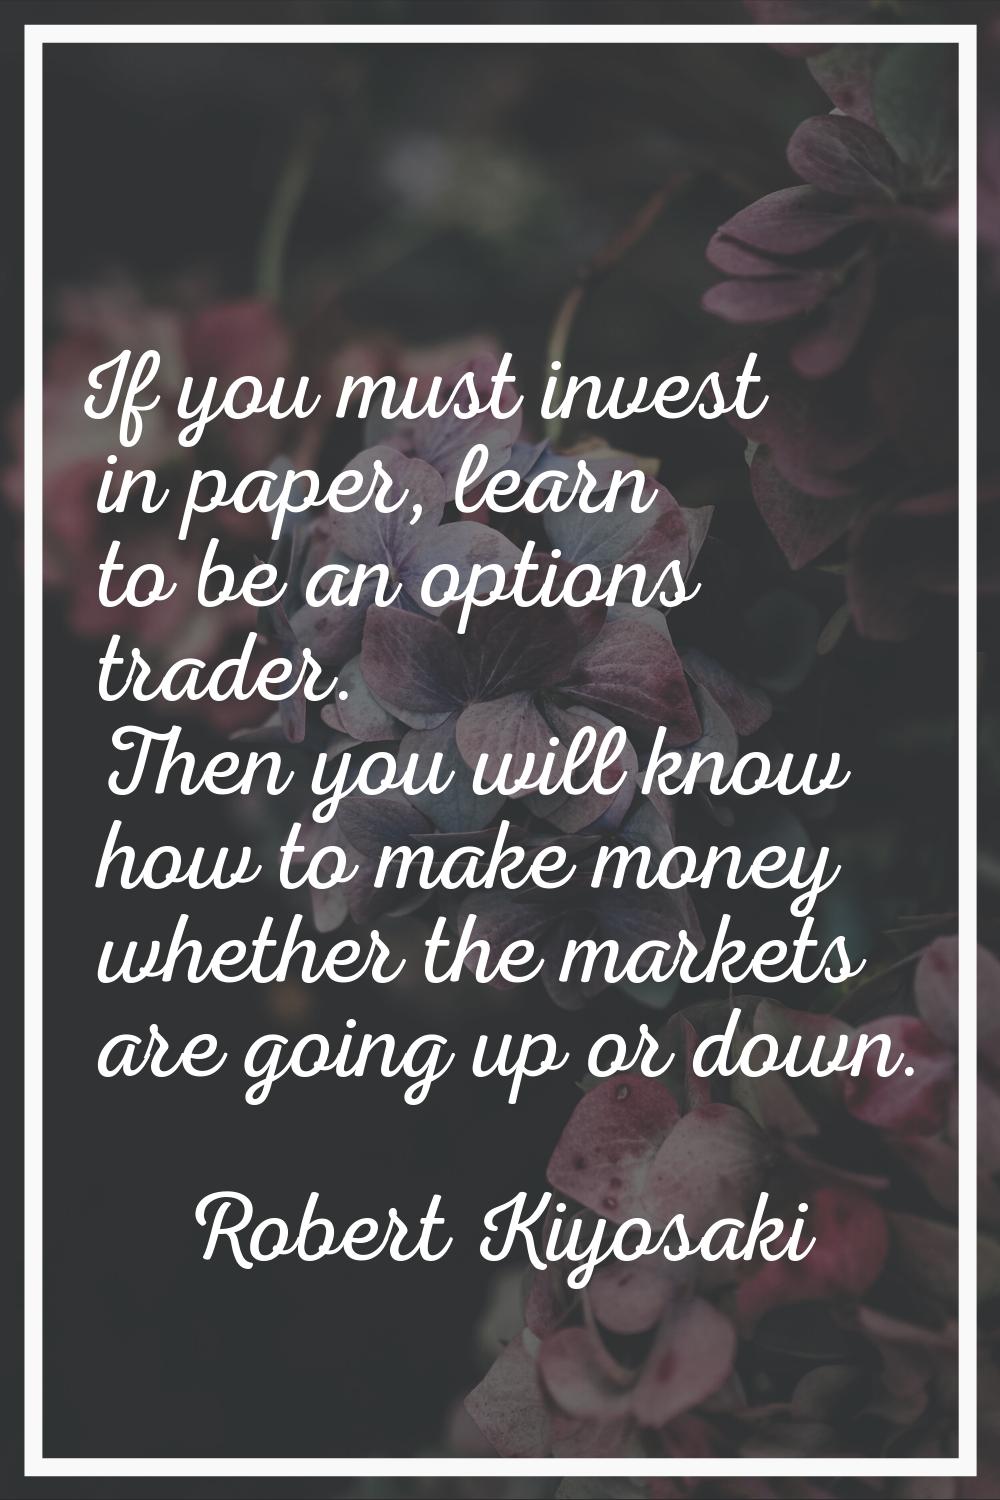 If you must invest in paper, learn to be an options trader. Then you will know how to make money wh